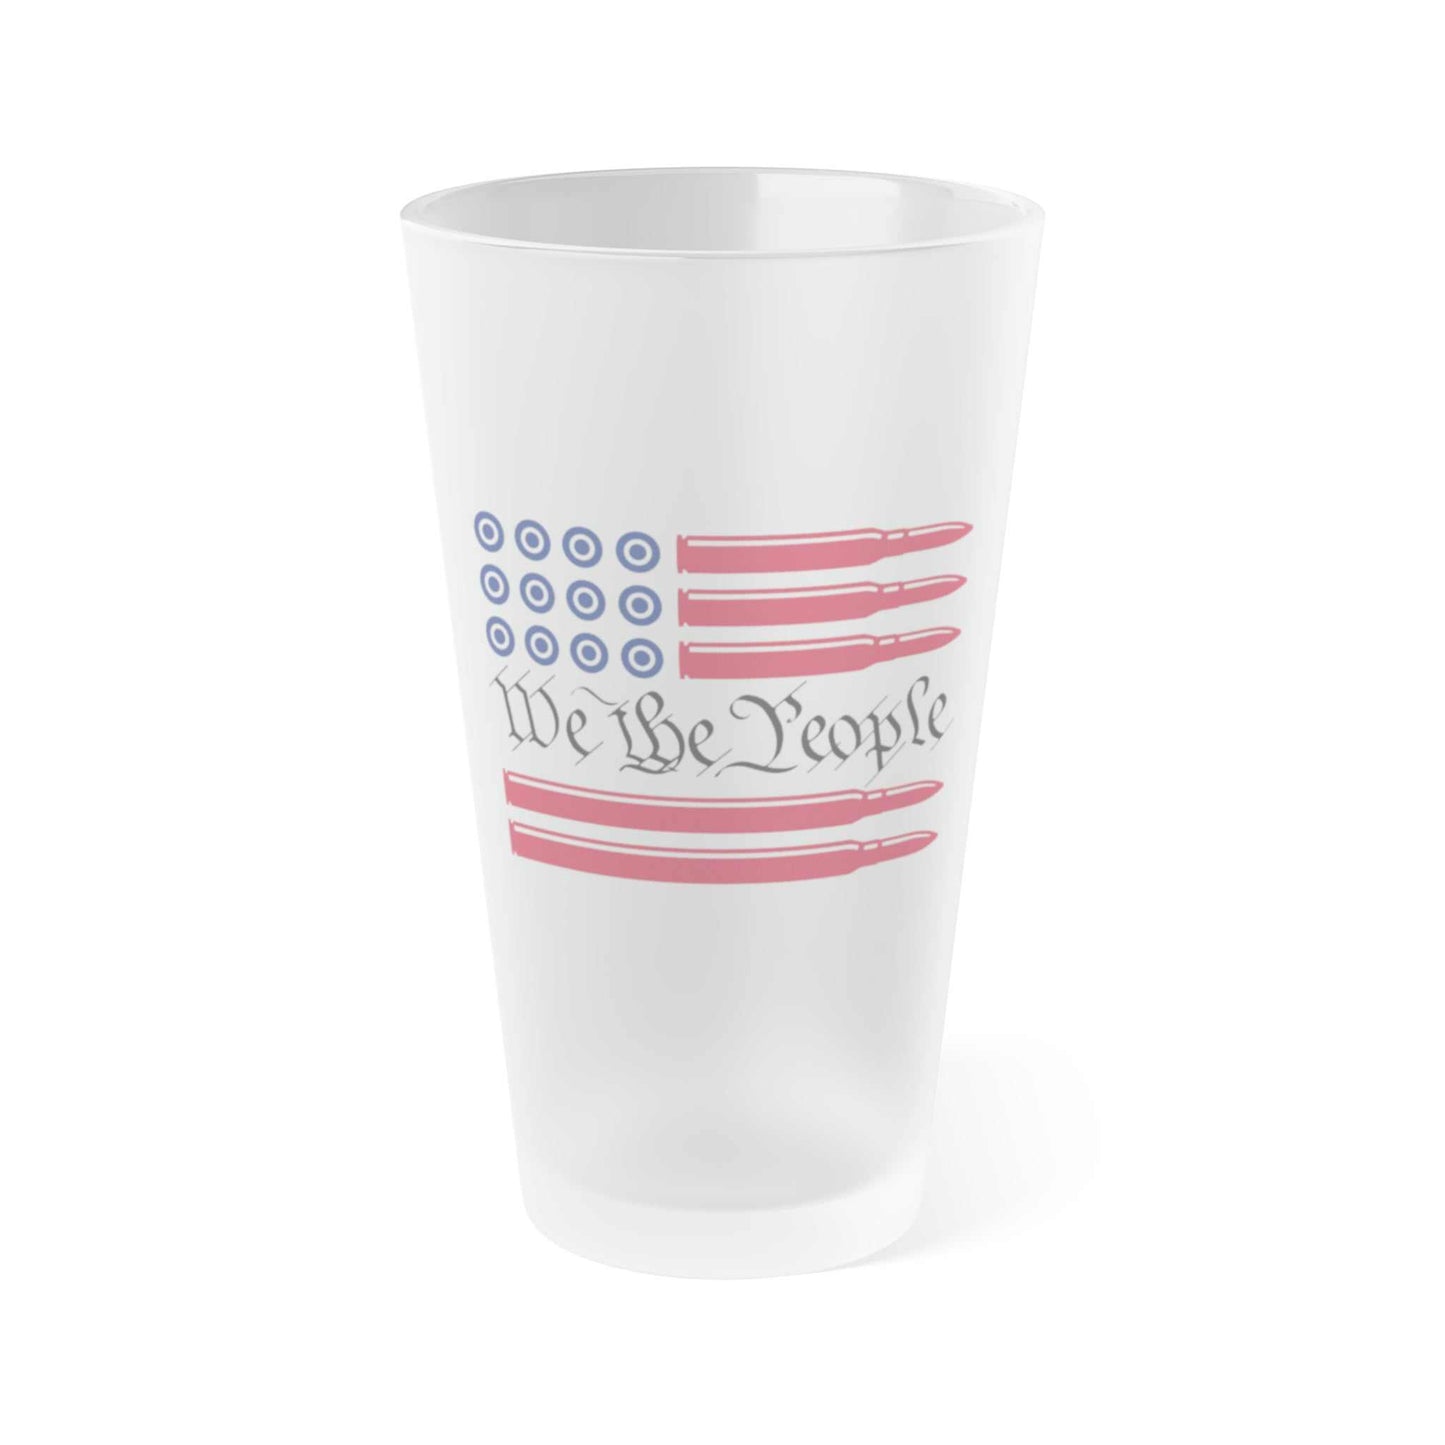 We The People -Frosted Pint Glass, 16ozPeople -Frosted Pint Glass, 16oz